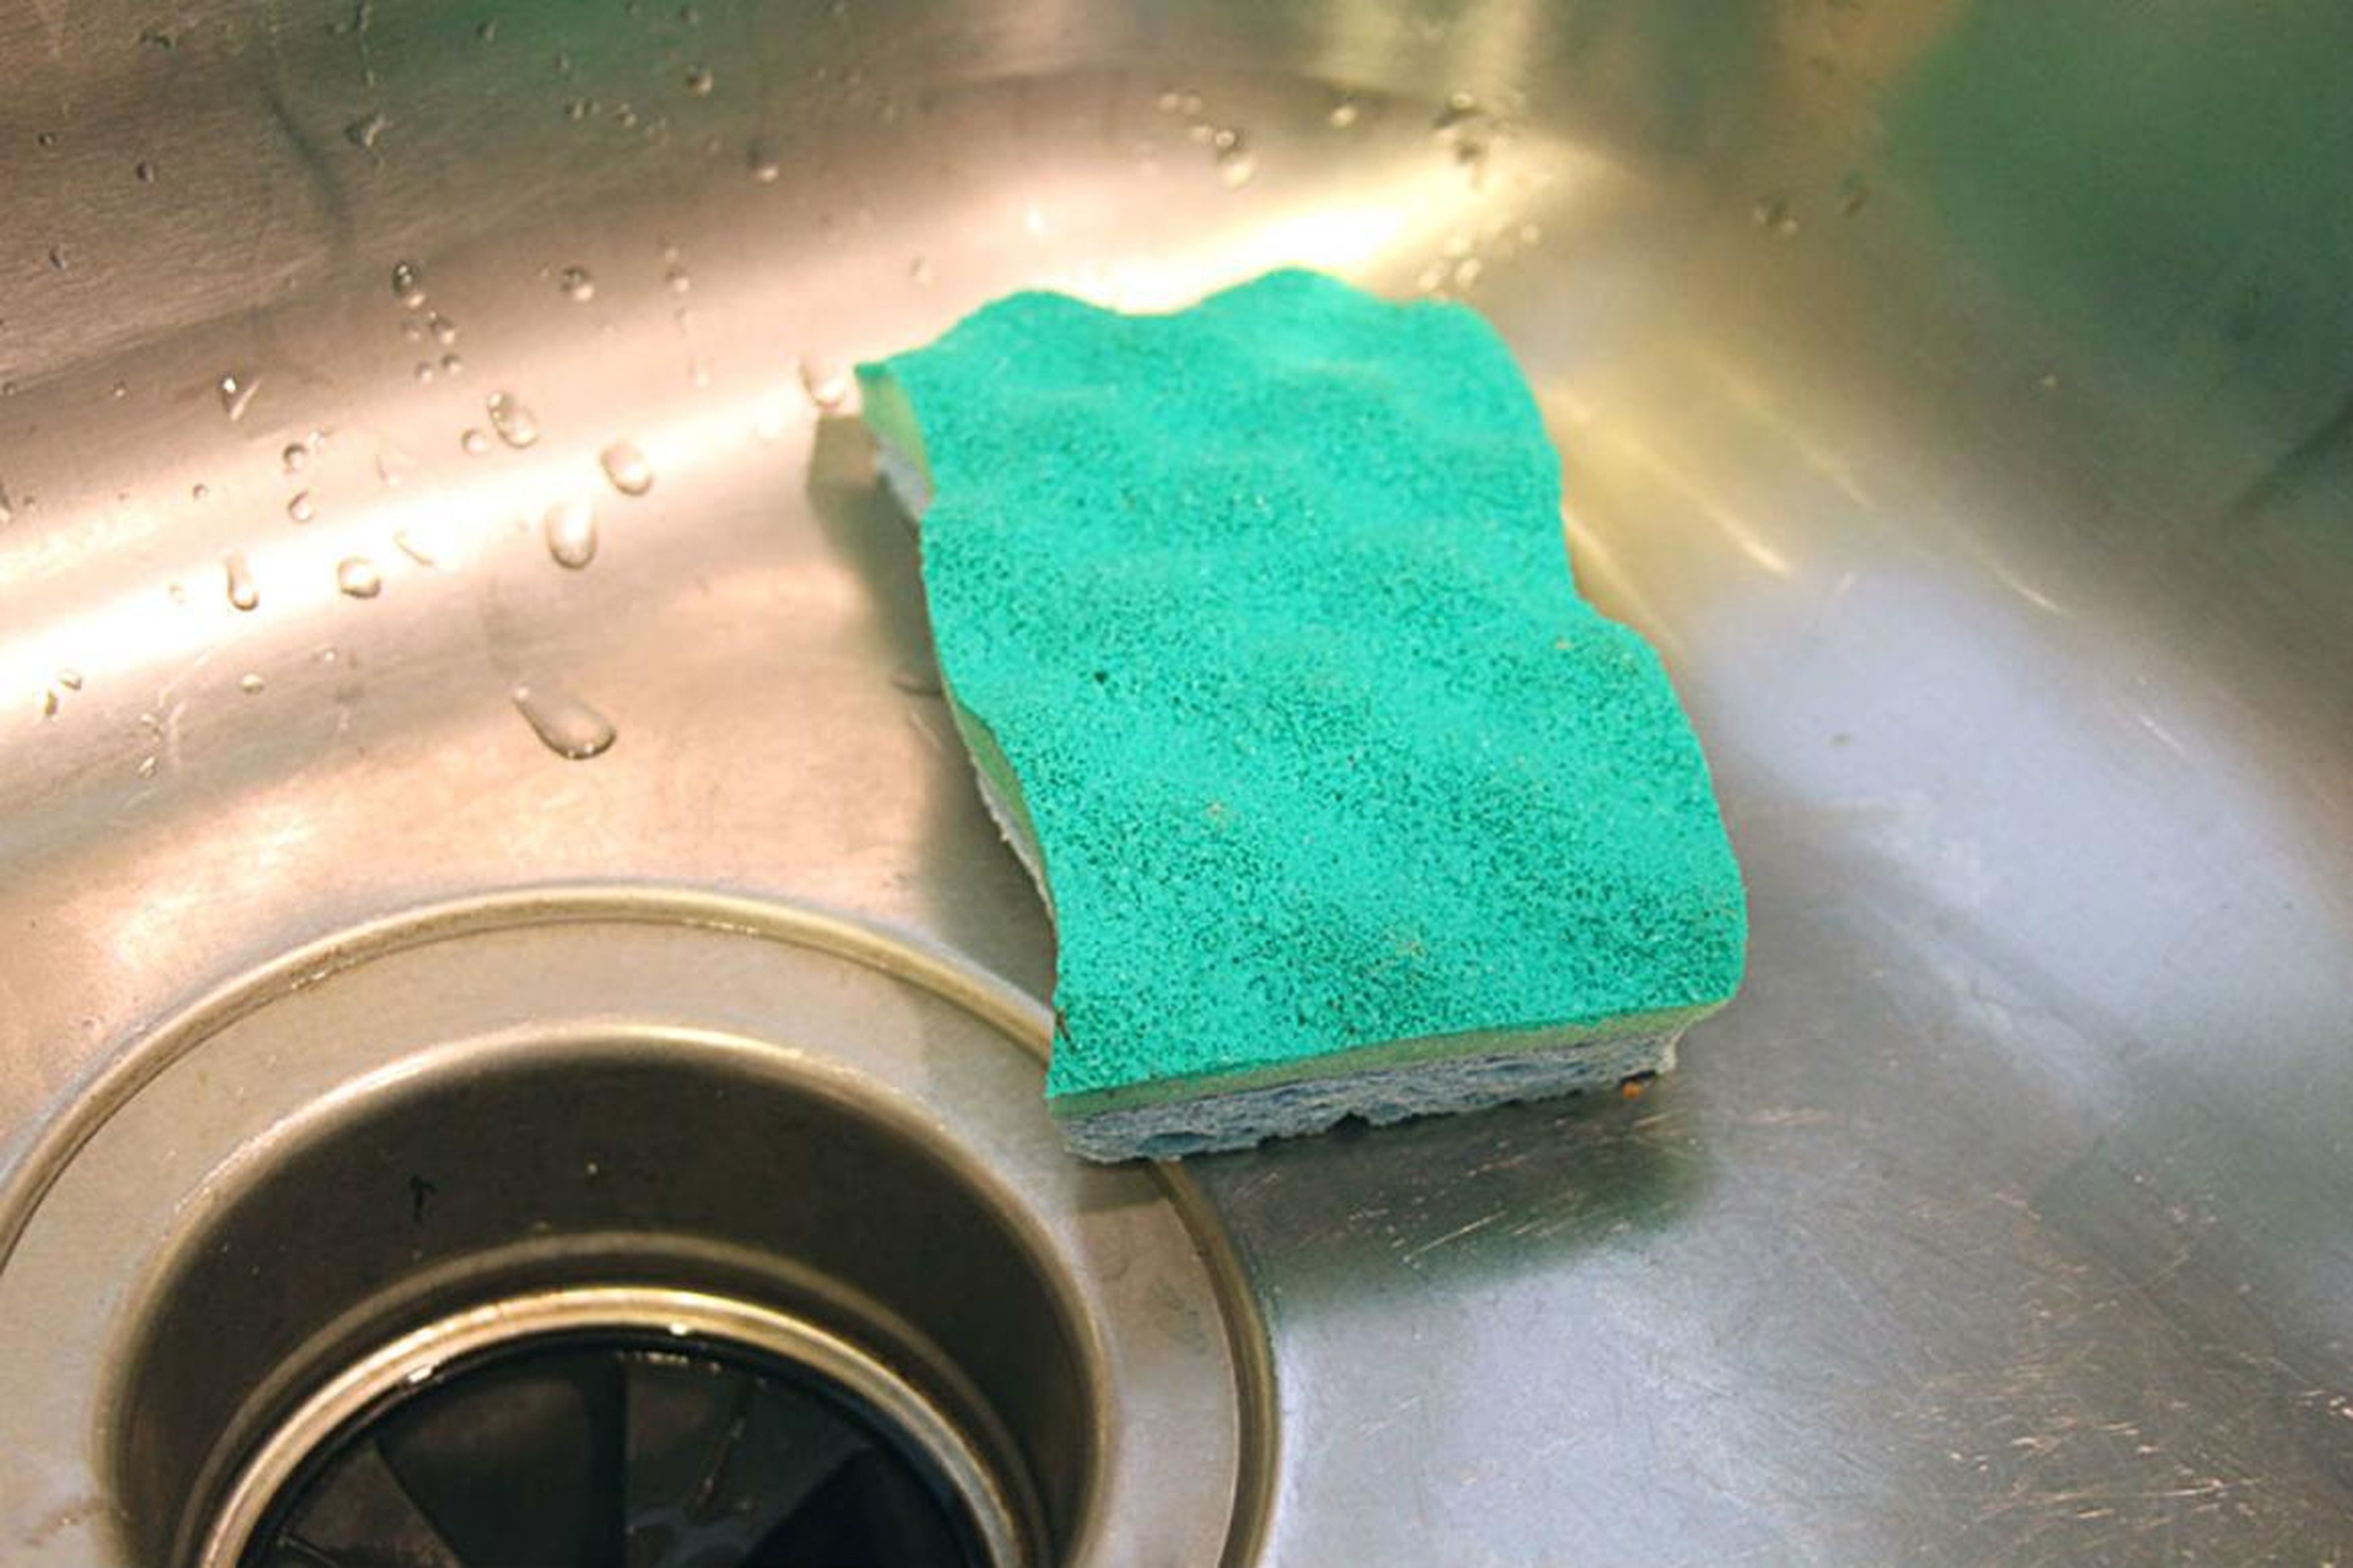 Your sponge is one of the grossest things you own. Microbiologists say you should replace it once a week.